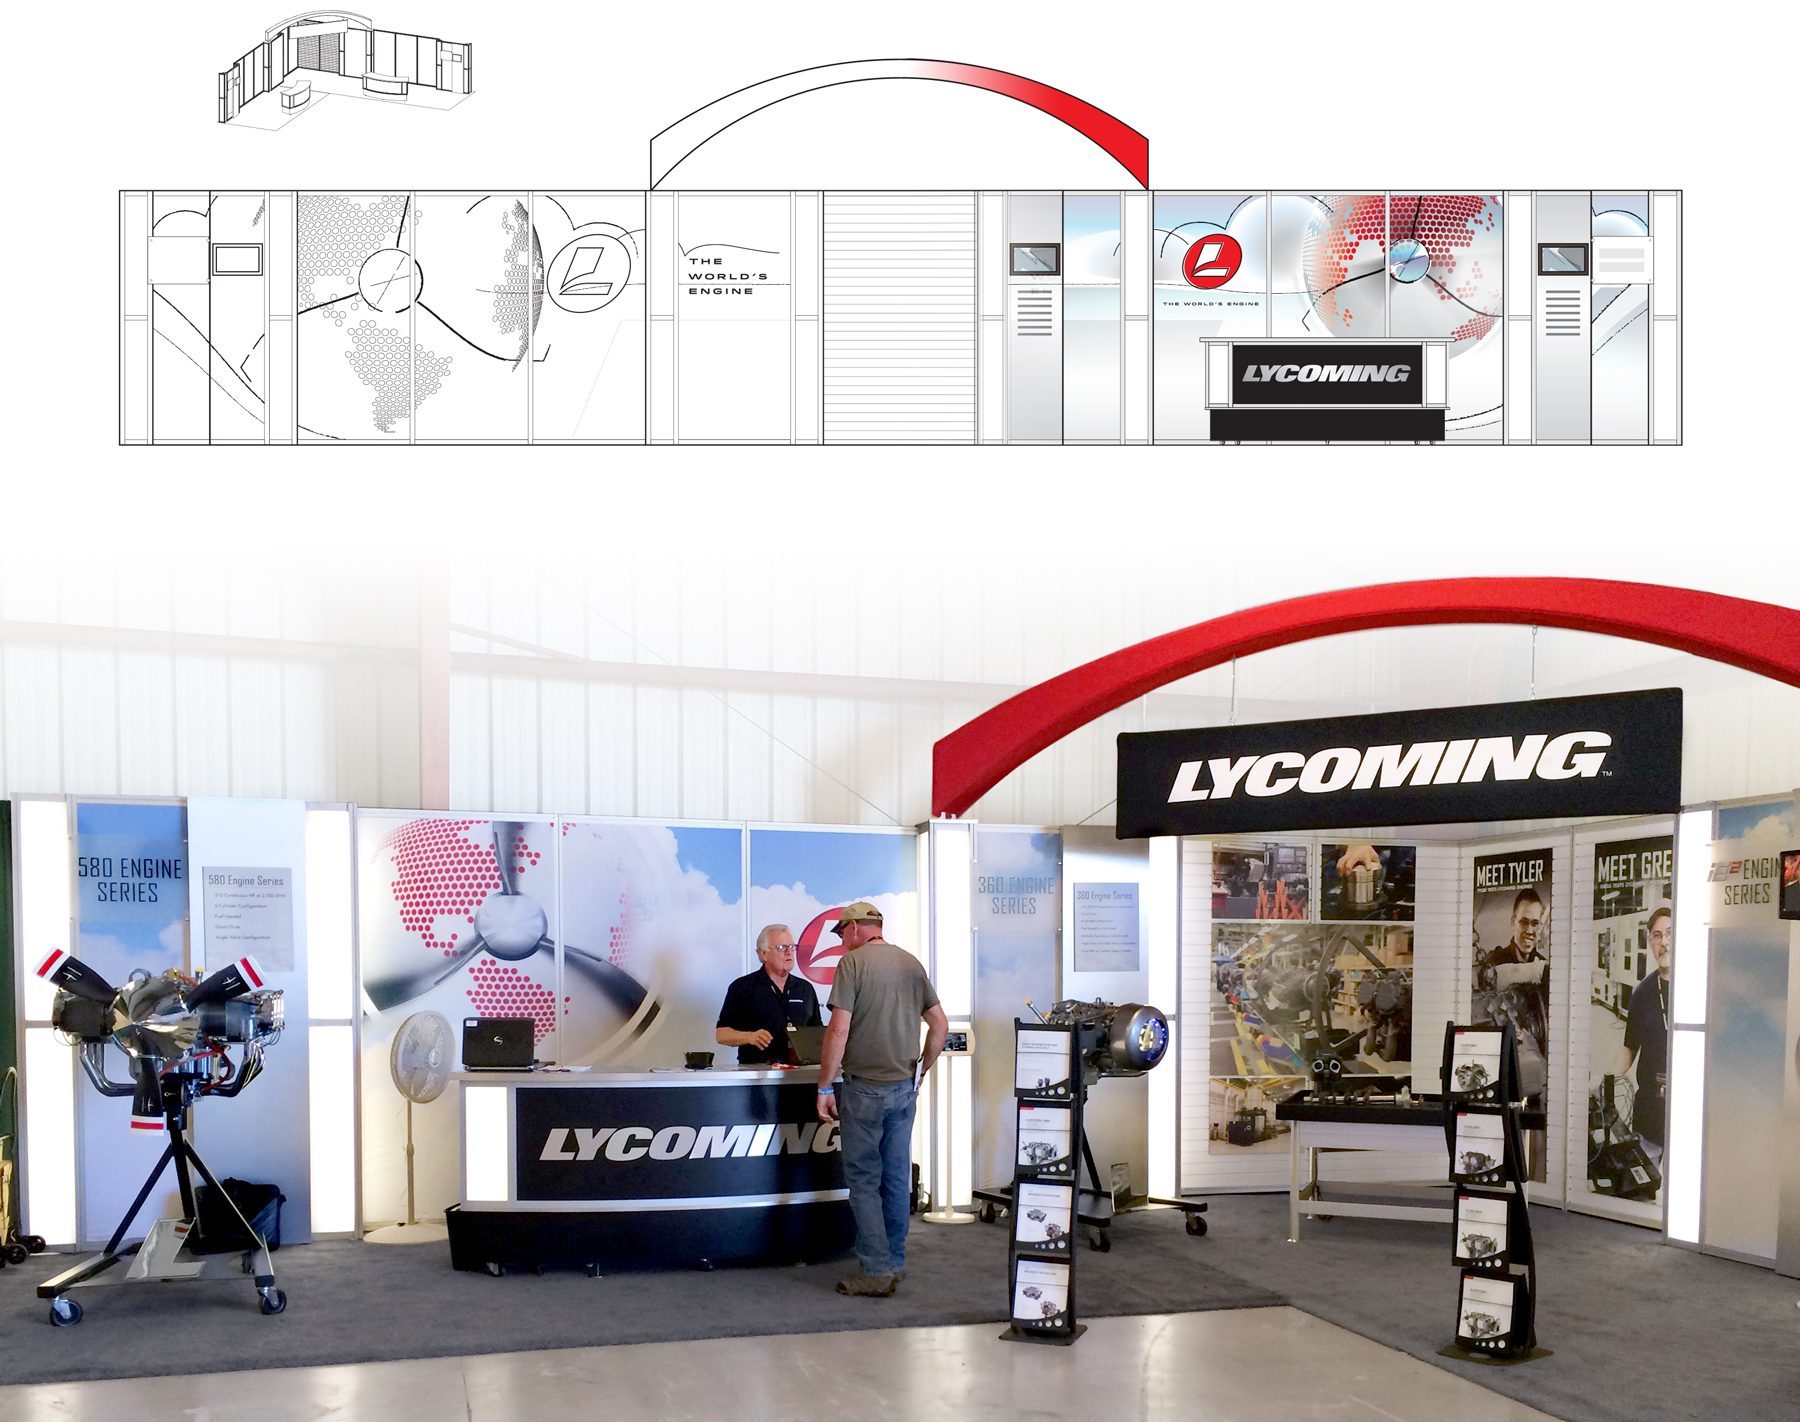 Aircraft engine manufacturer trade show booth sketch and a picture of a booth at a trade show